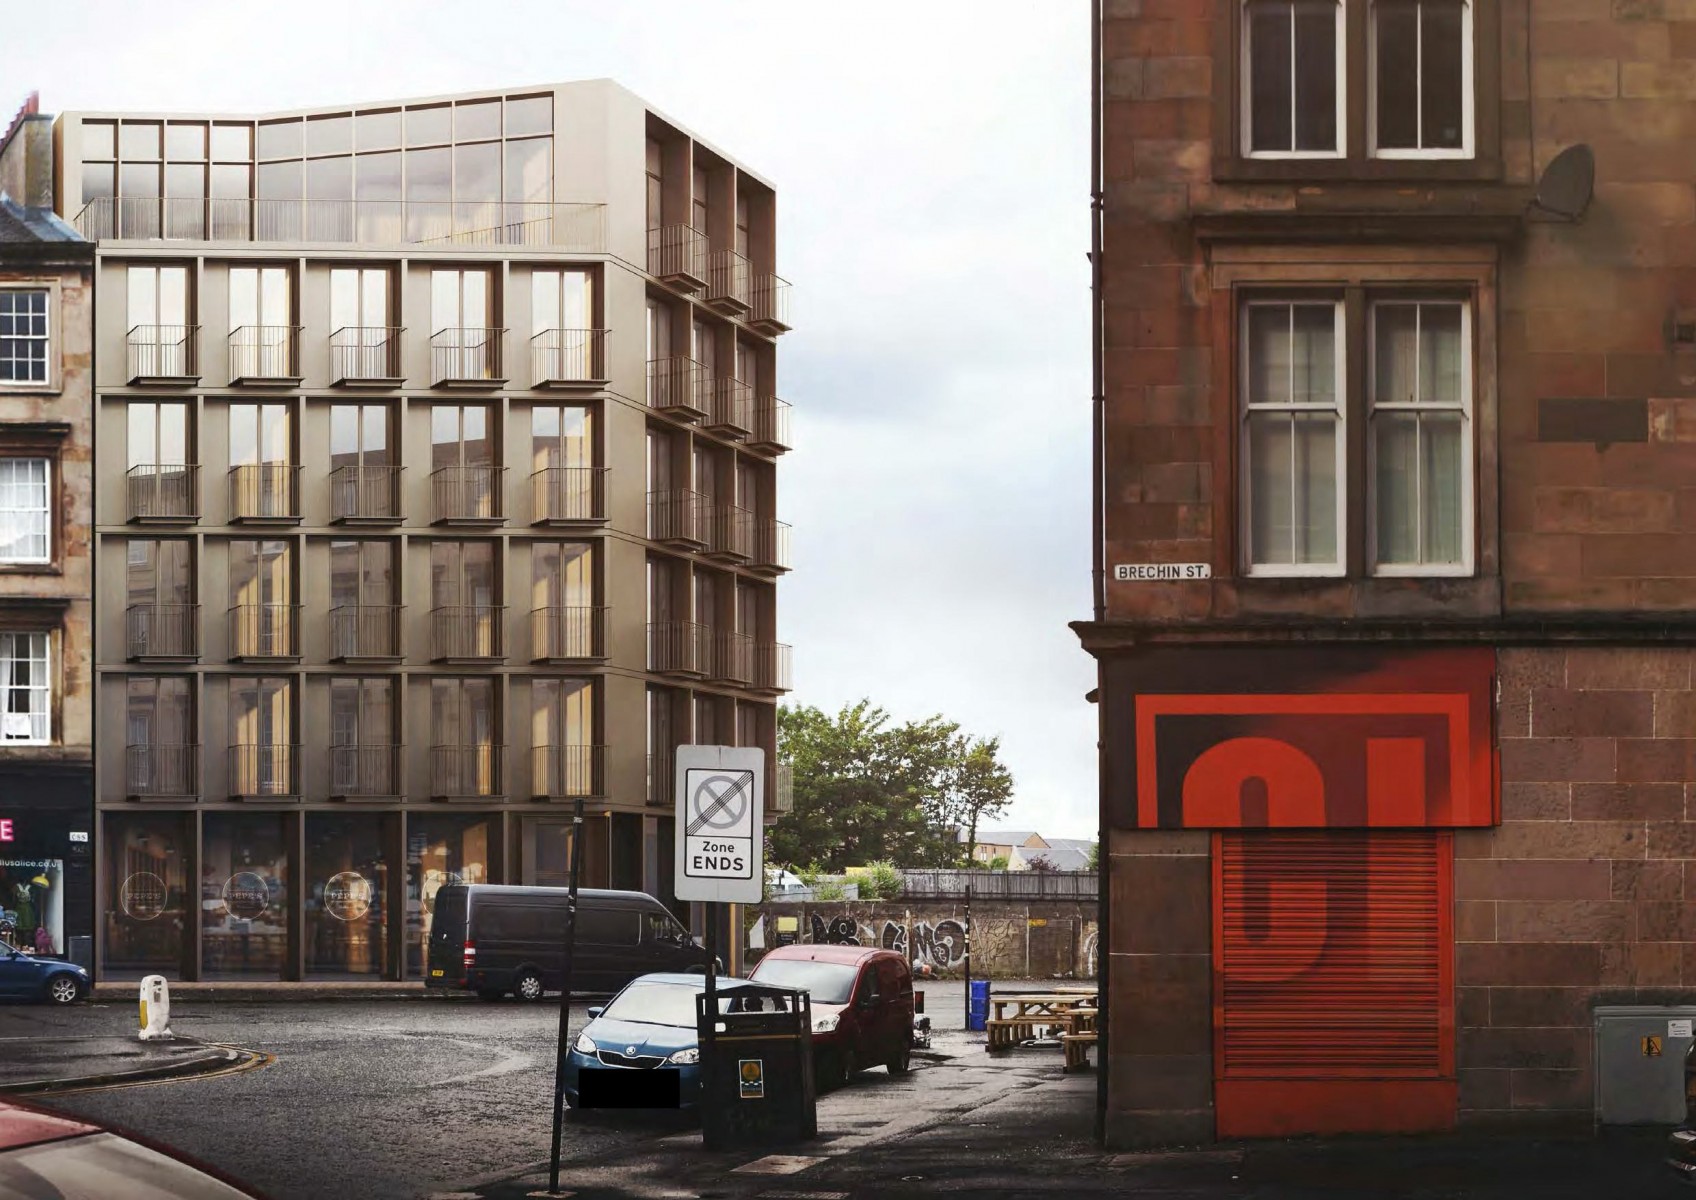 New block of flats and commercial units planned for Argyle Street in Glasgow